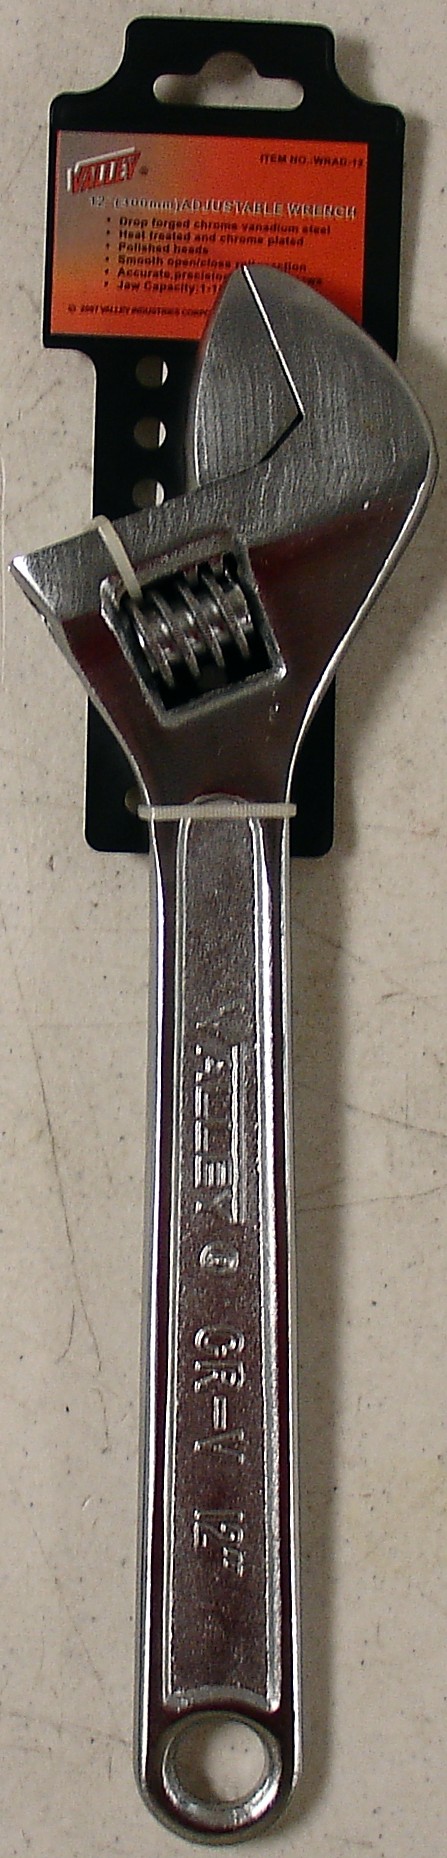 12 Adjustable WRENCH